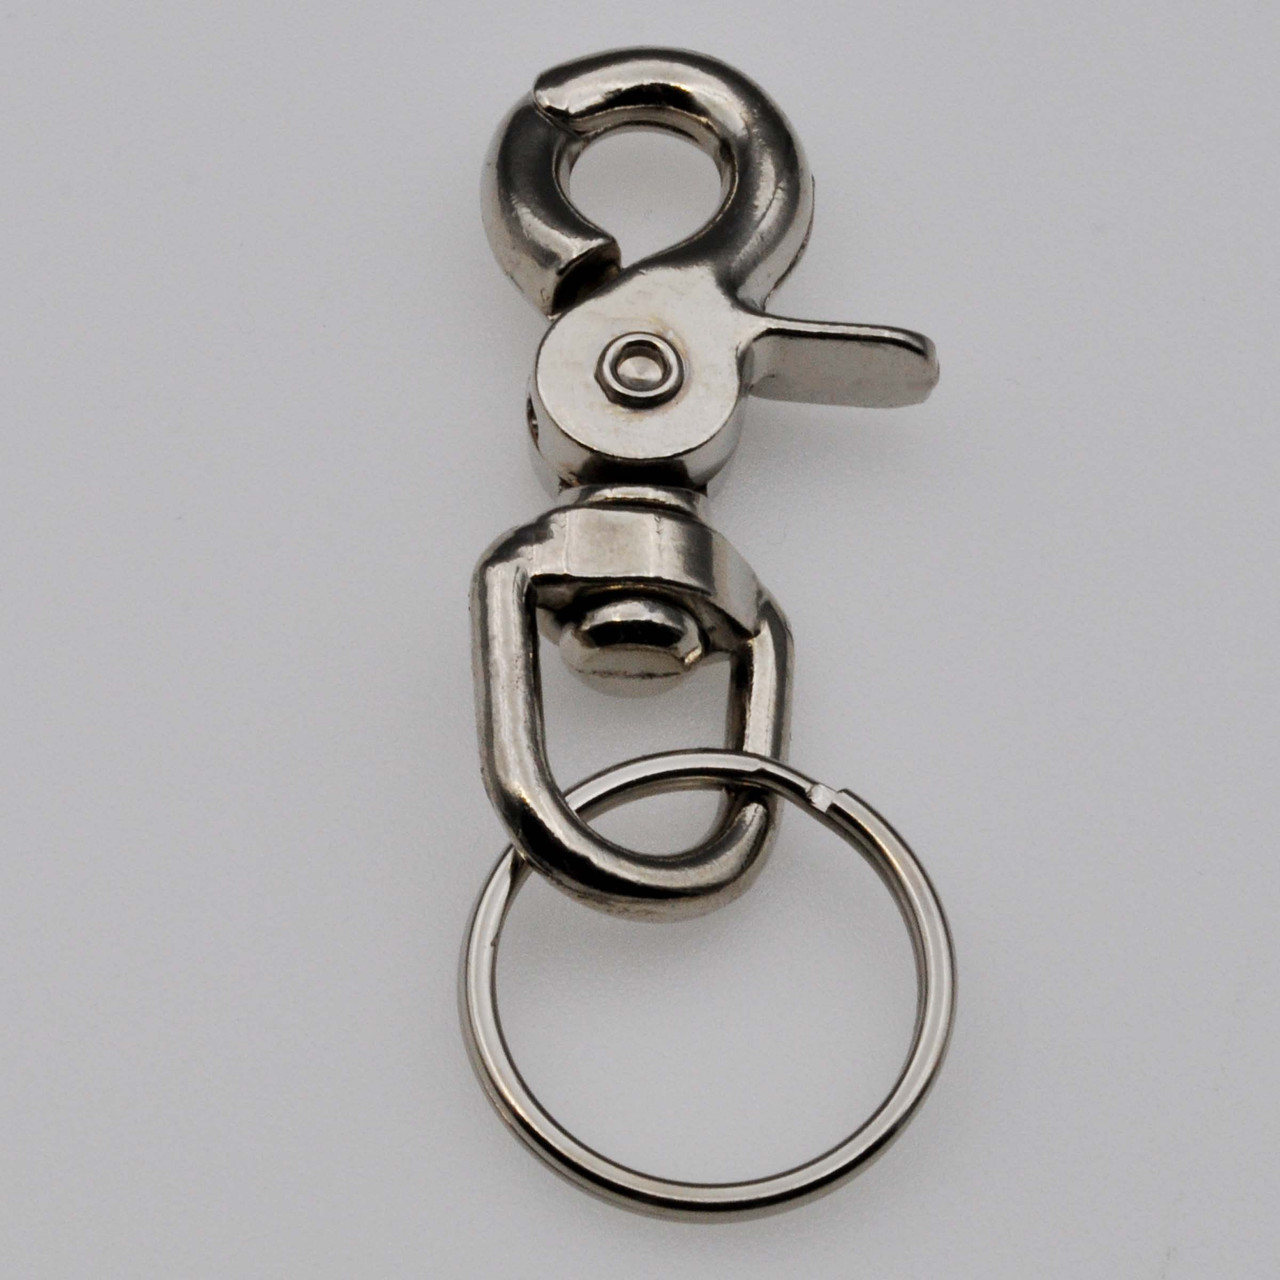 Shop for and Buy Heavy Duty Trigger Snap Clip Key Ring Nickel